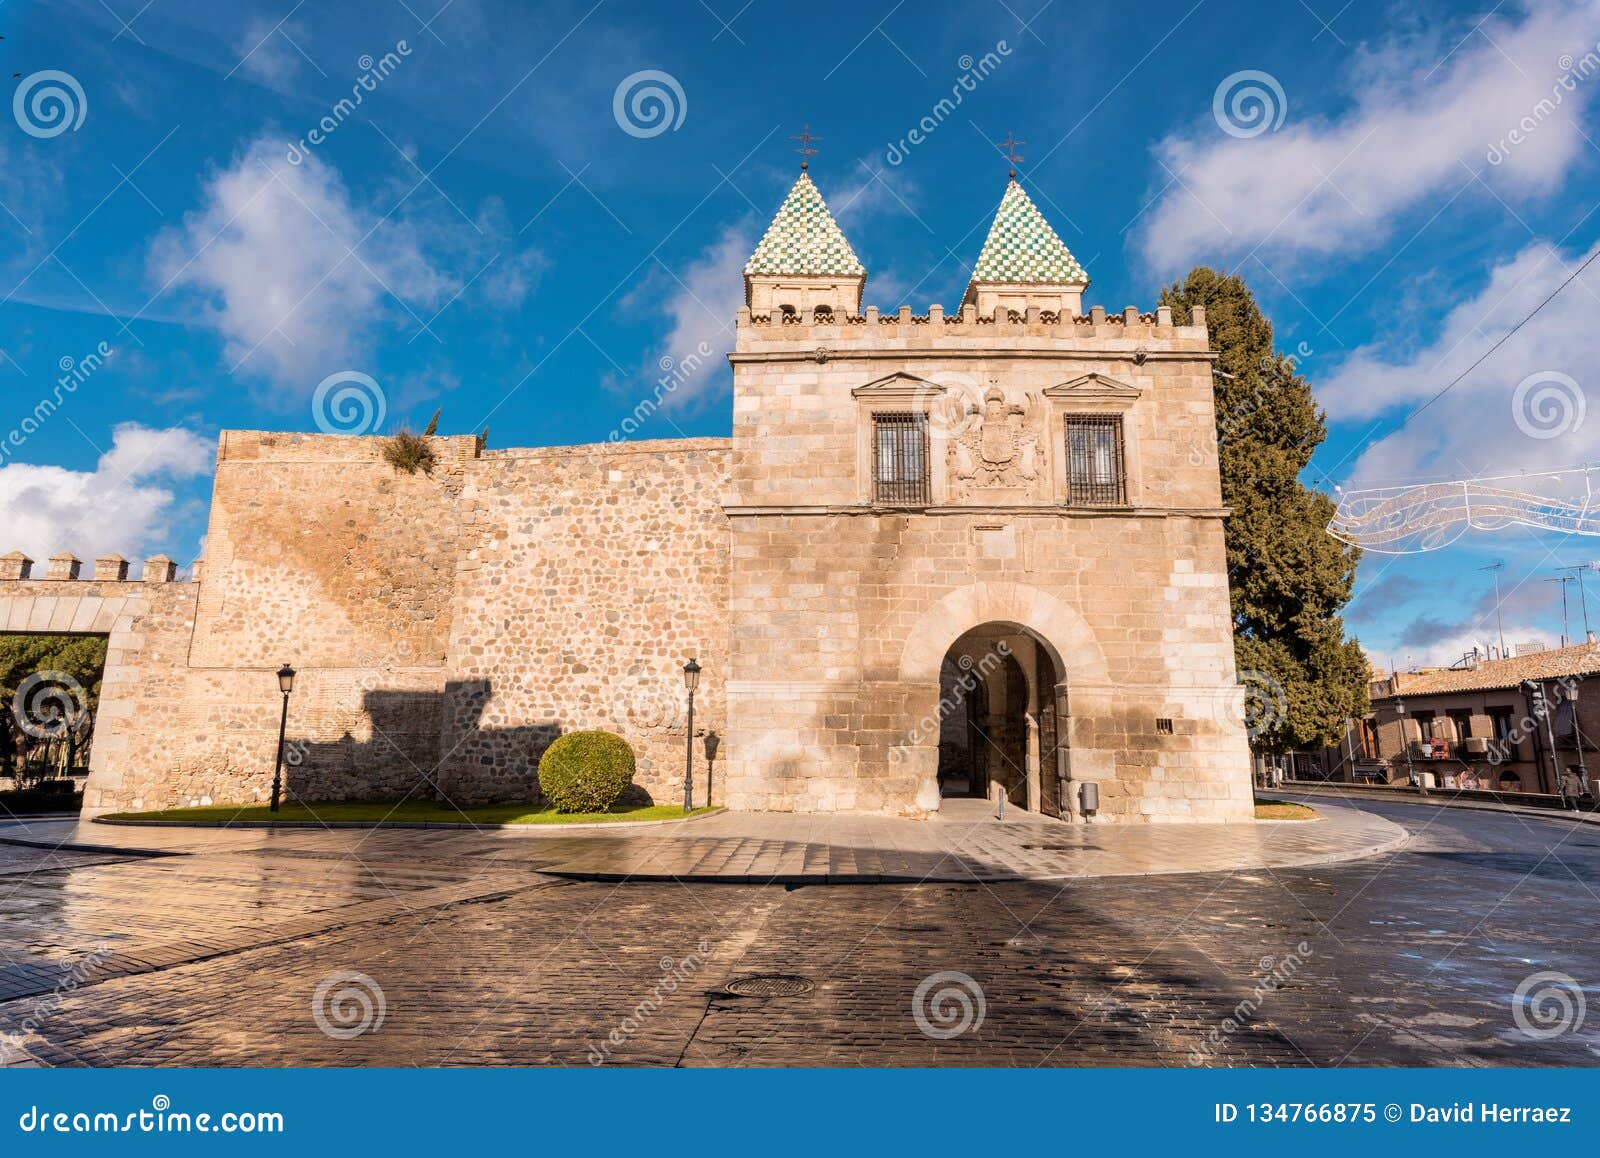 toledo, spain famous monument bisagra gate, ancient medieval access to the city walls